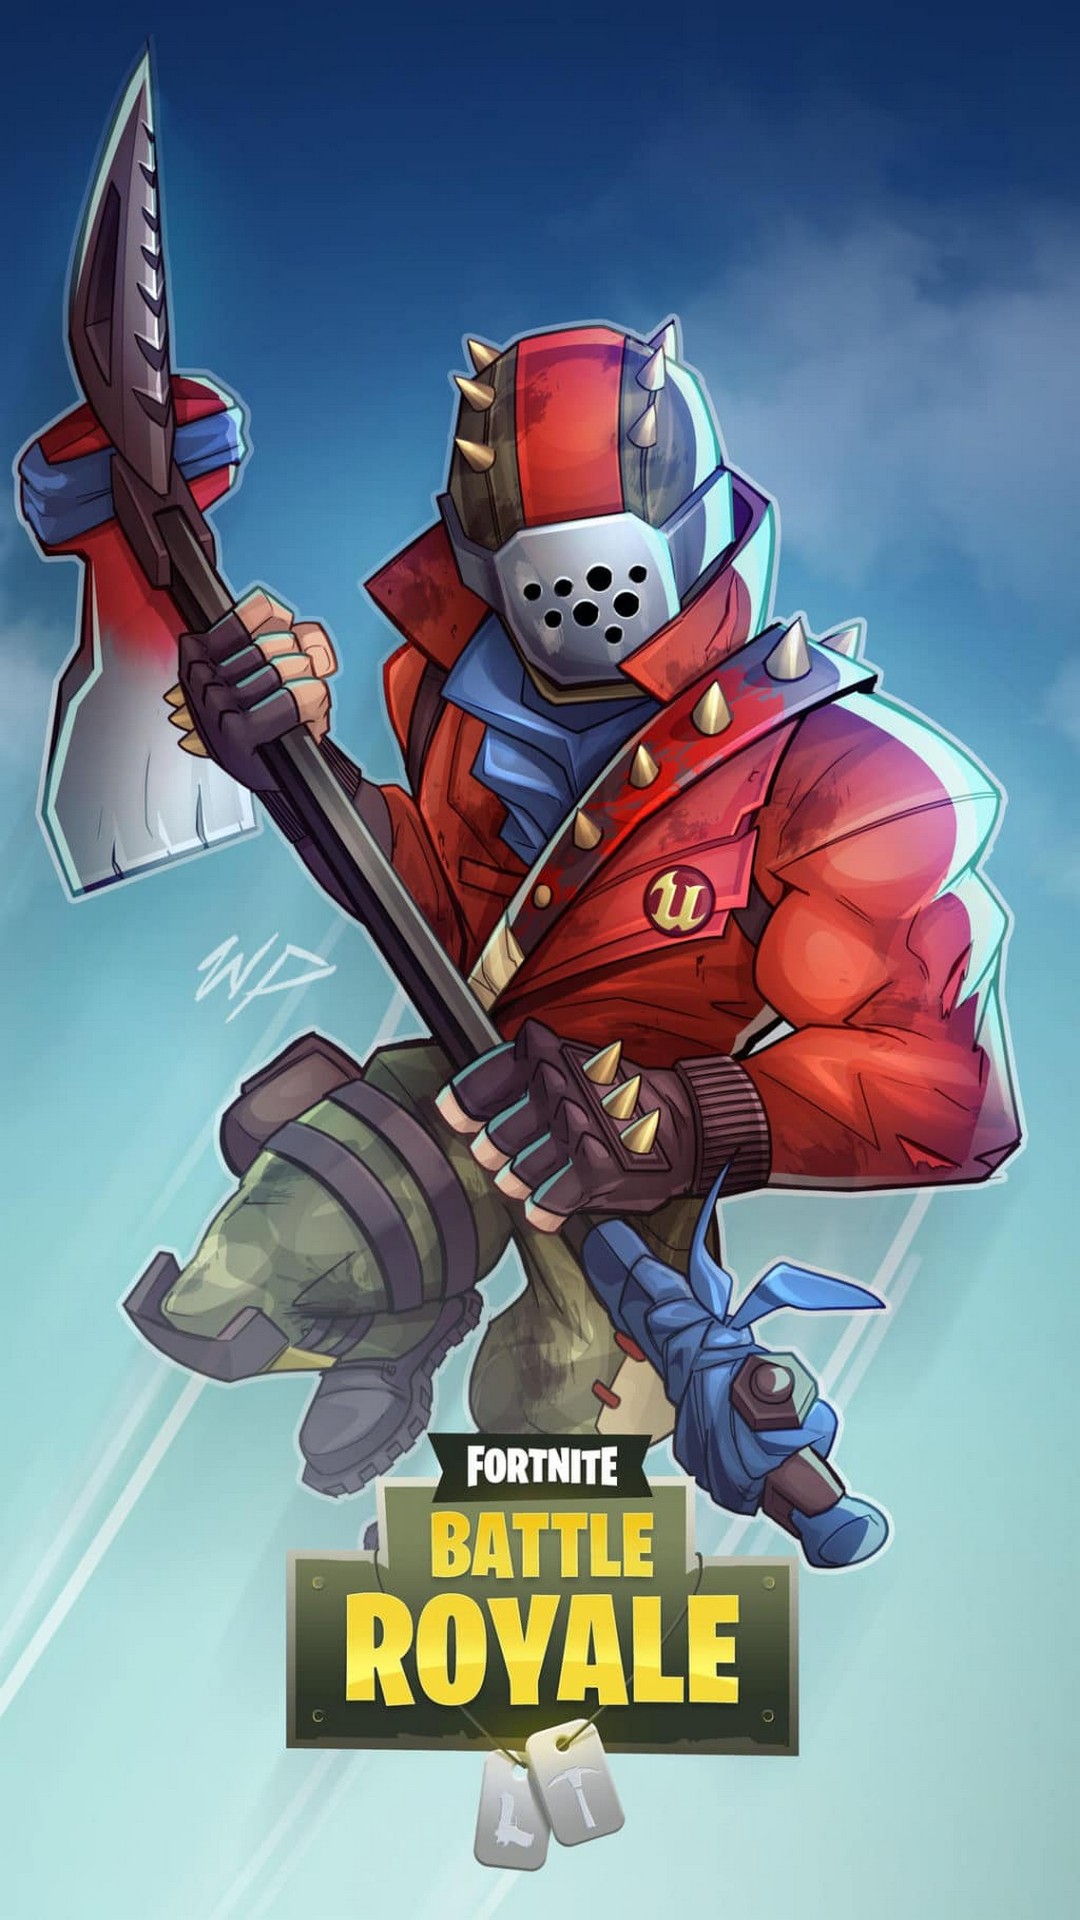 Fortnite Wallpaper for iPhone with high-resolution 1080x1920 pixel. You can use this wallpaper for your iPhone 5, 6, 7, 8, X, XS, XR backgrounds, Mobile Screensaver, or iPad Lock Screen